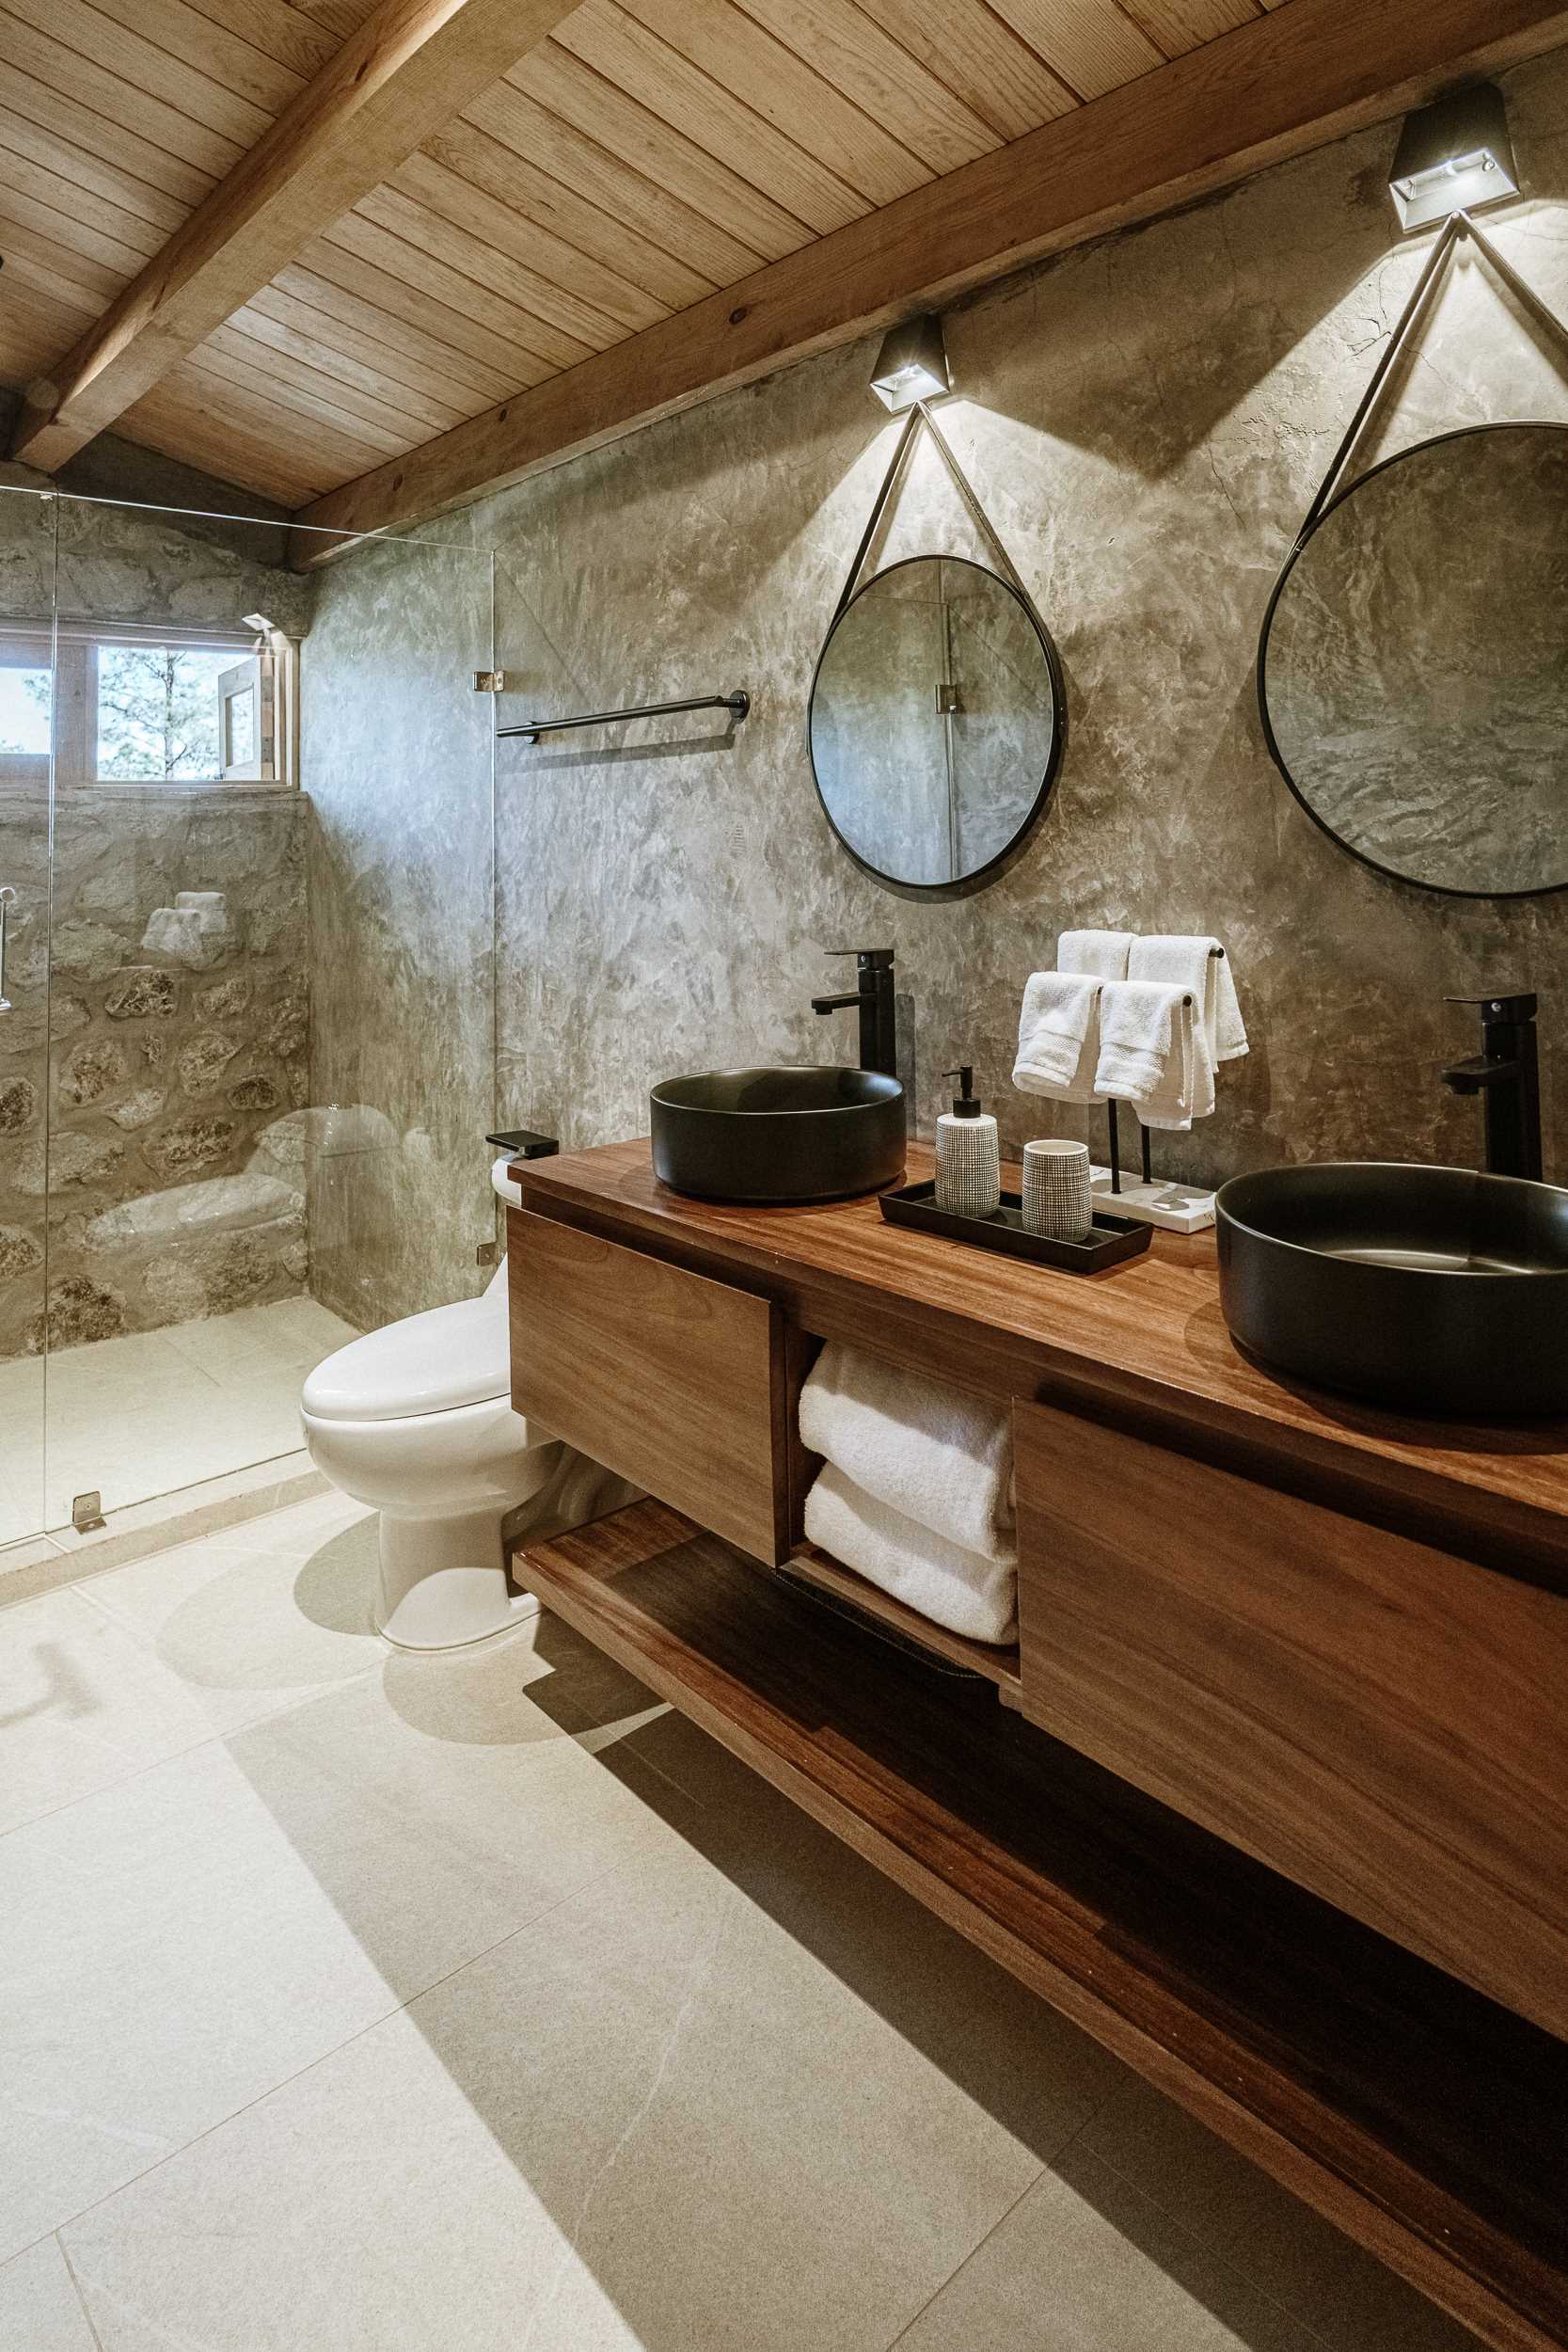 This stone and wood bathroom includes a double vanity and glass-enclosed shower.